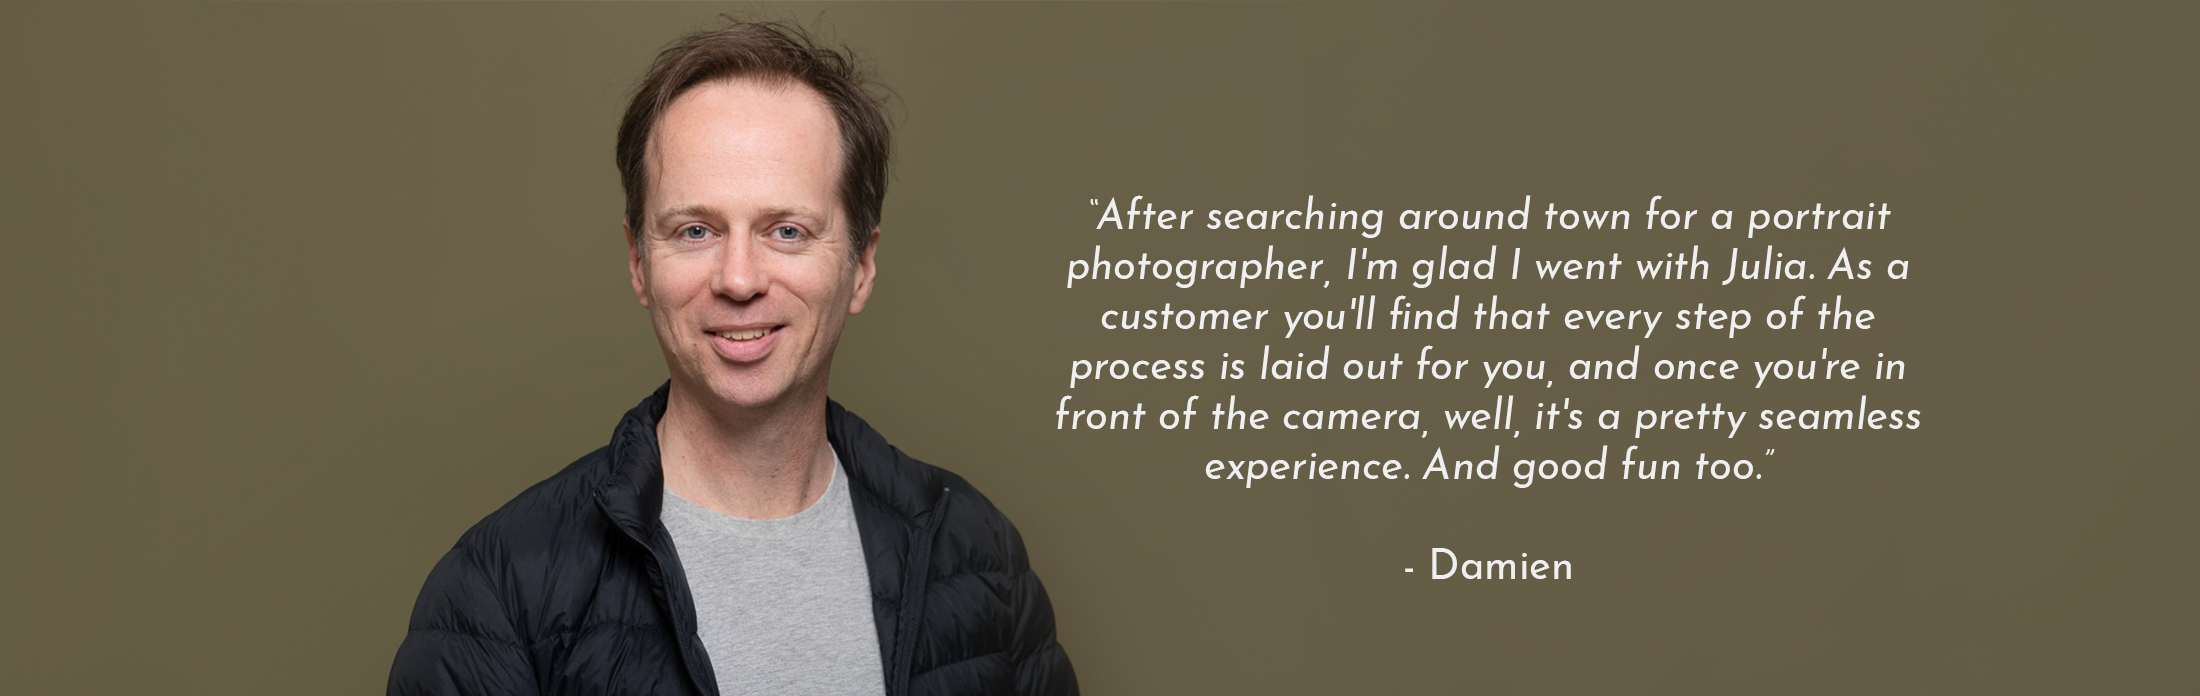 Text Reads: “After searching around town for a portrait photographer, I'm glad I went with Julia. As a customer you'll find that every step of the process is laid out for you, and once you're in front of the camera, well, it's a pretty seamless experience. And good fun too.” - Damien